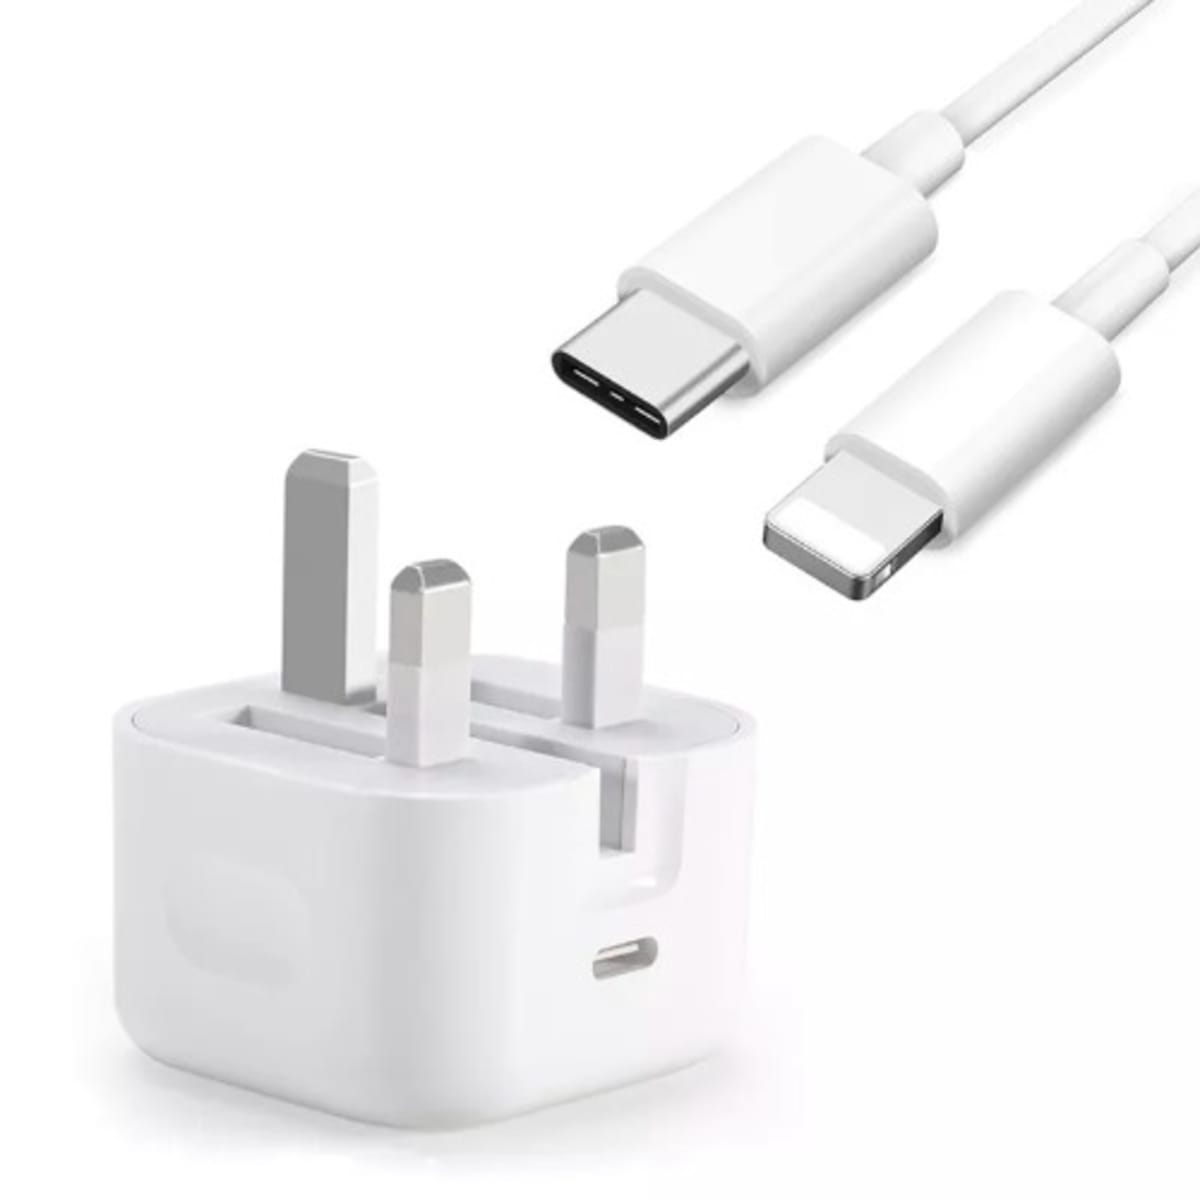 iPhone Charger With Usb-c Cable - 3 Pin Head With Cable